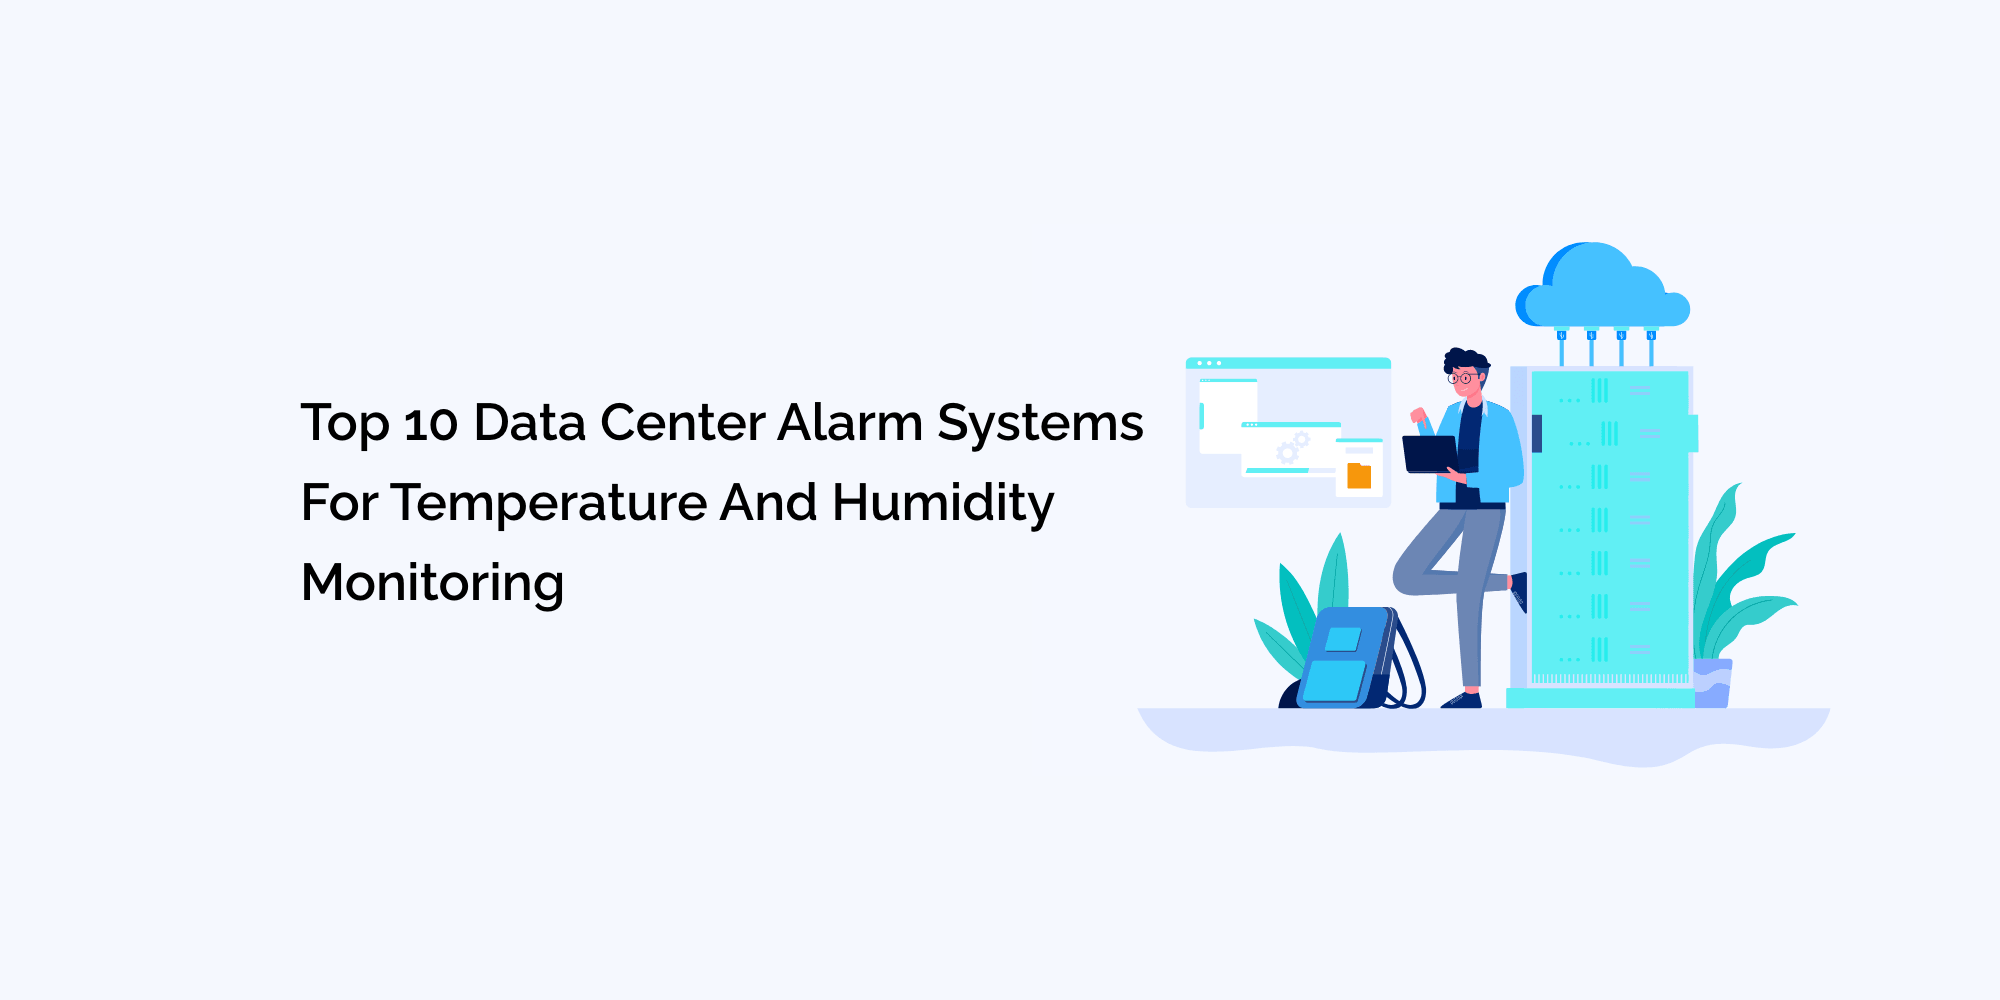 Top 10 Data Center Alarm Systems for Temperature and Humidity Monitoring